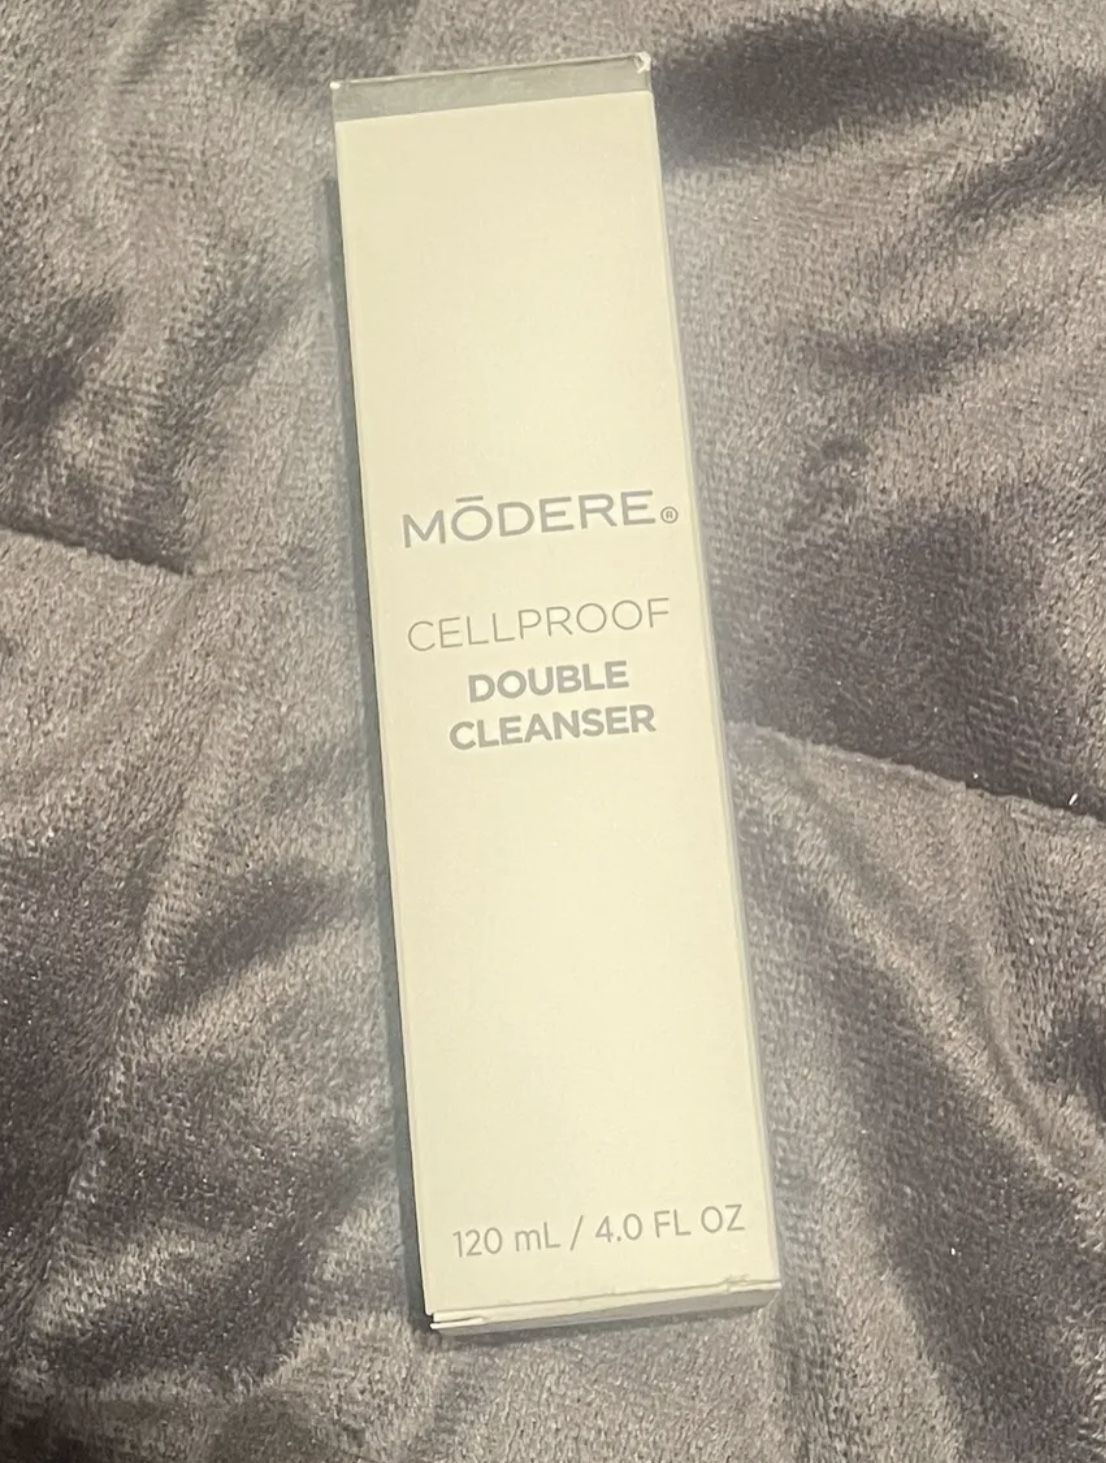 Modere Cellproof Double Cleanser 4oz. New In Box. Exp 03/24